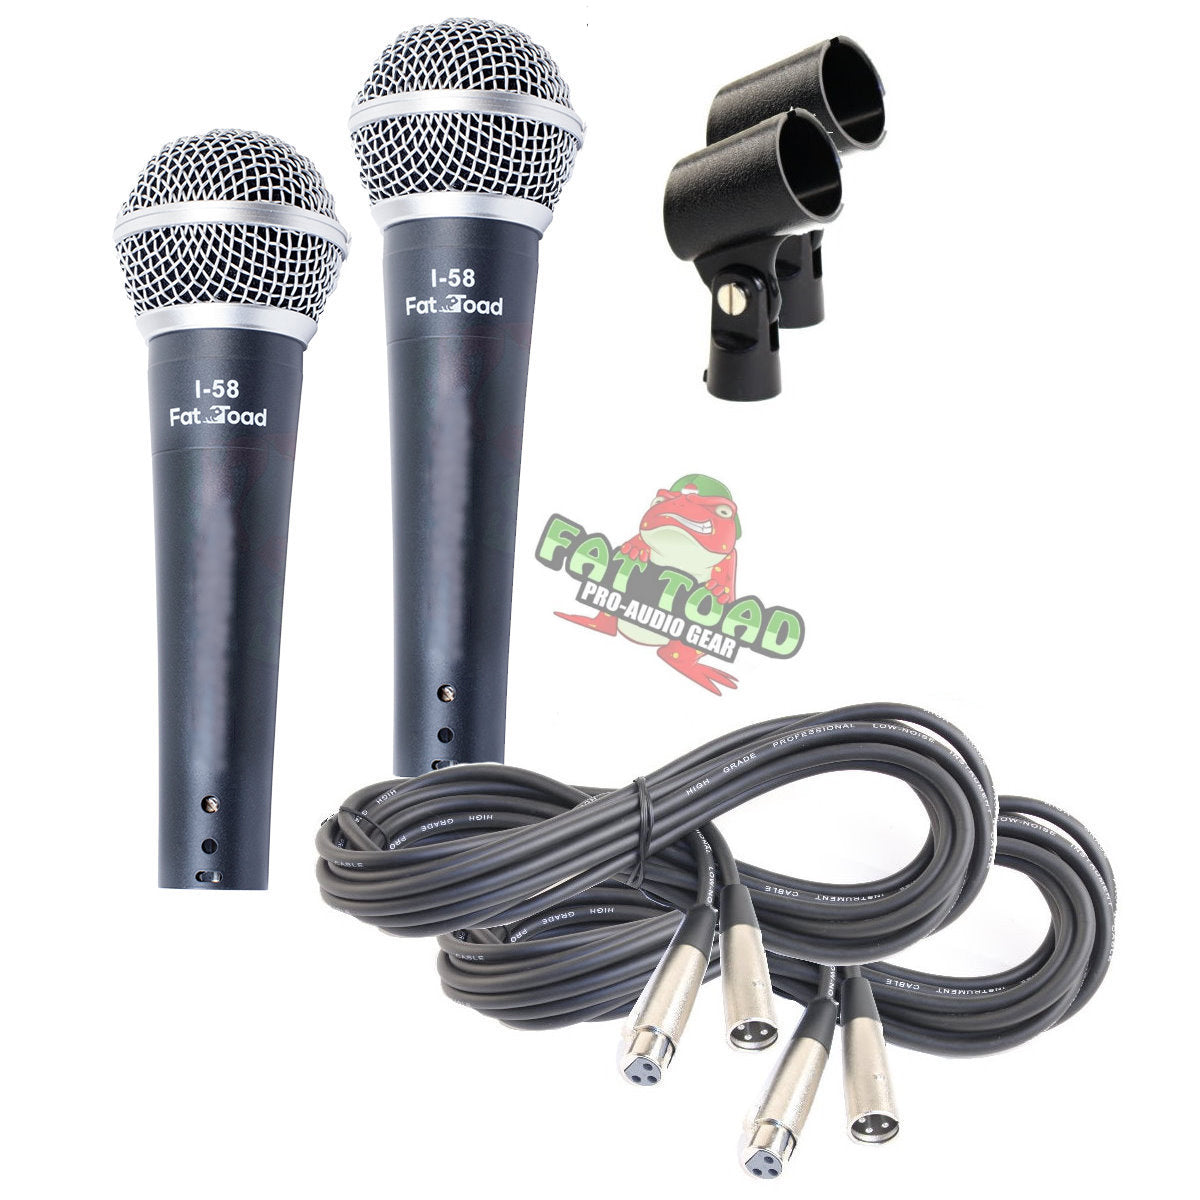 Vocal Microphones with XLR Mic Cables & Clips (2 Pack) FAT TOAD - Cardioid Dynamic Handheld for Home Studio Recording Package, Live Stage DJ Singing